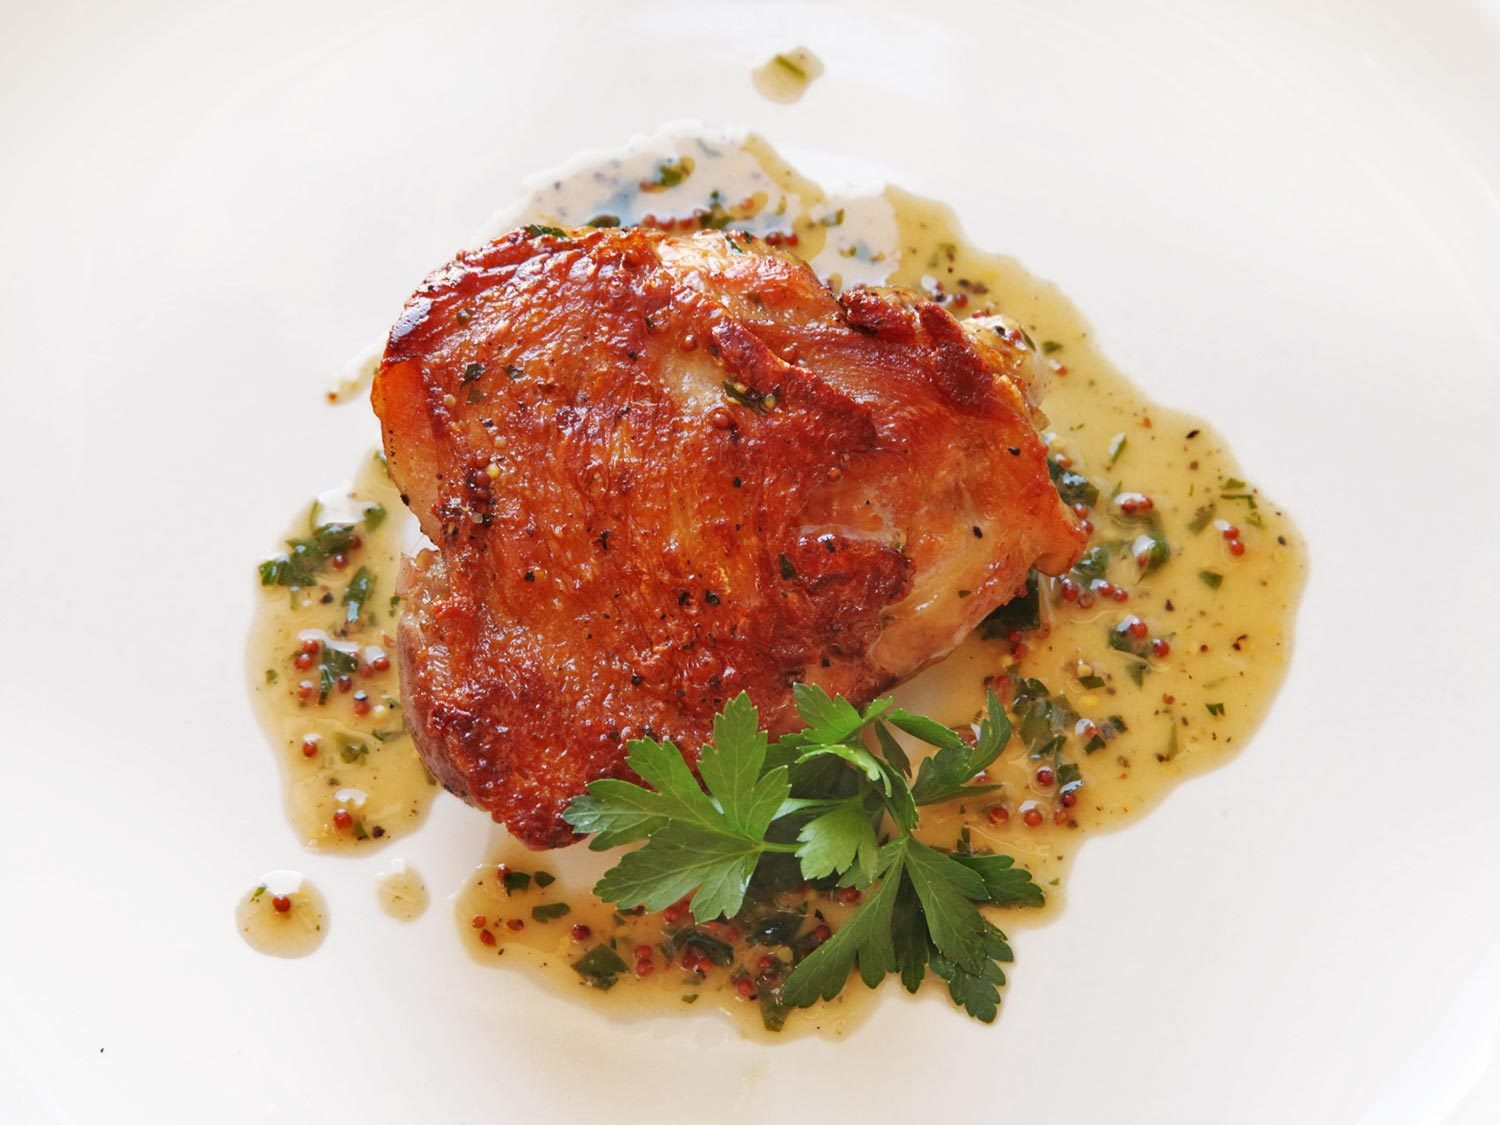 Sous Vide Chicken Thighs Recipe
 Crispy Sous Vide Chicken Thighs With Mustard Wine Pan